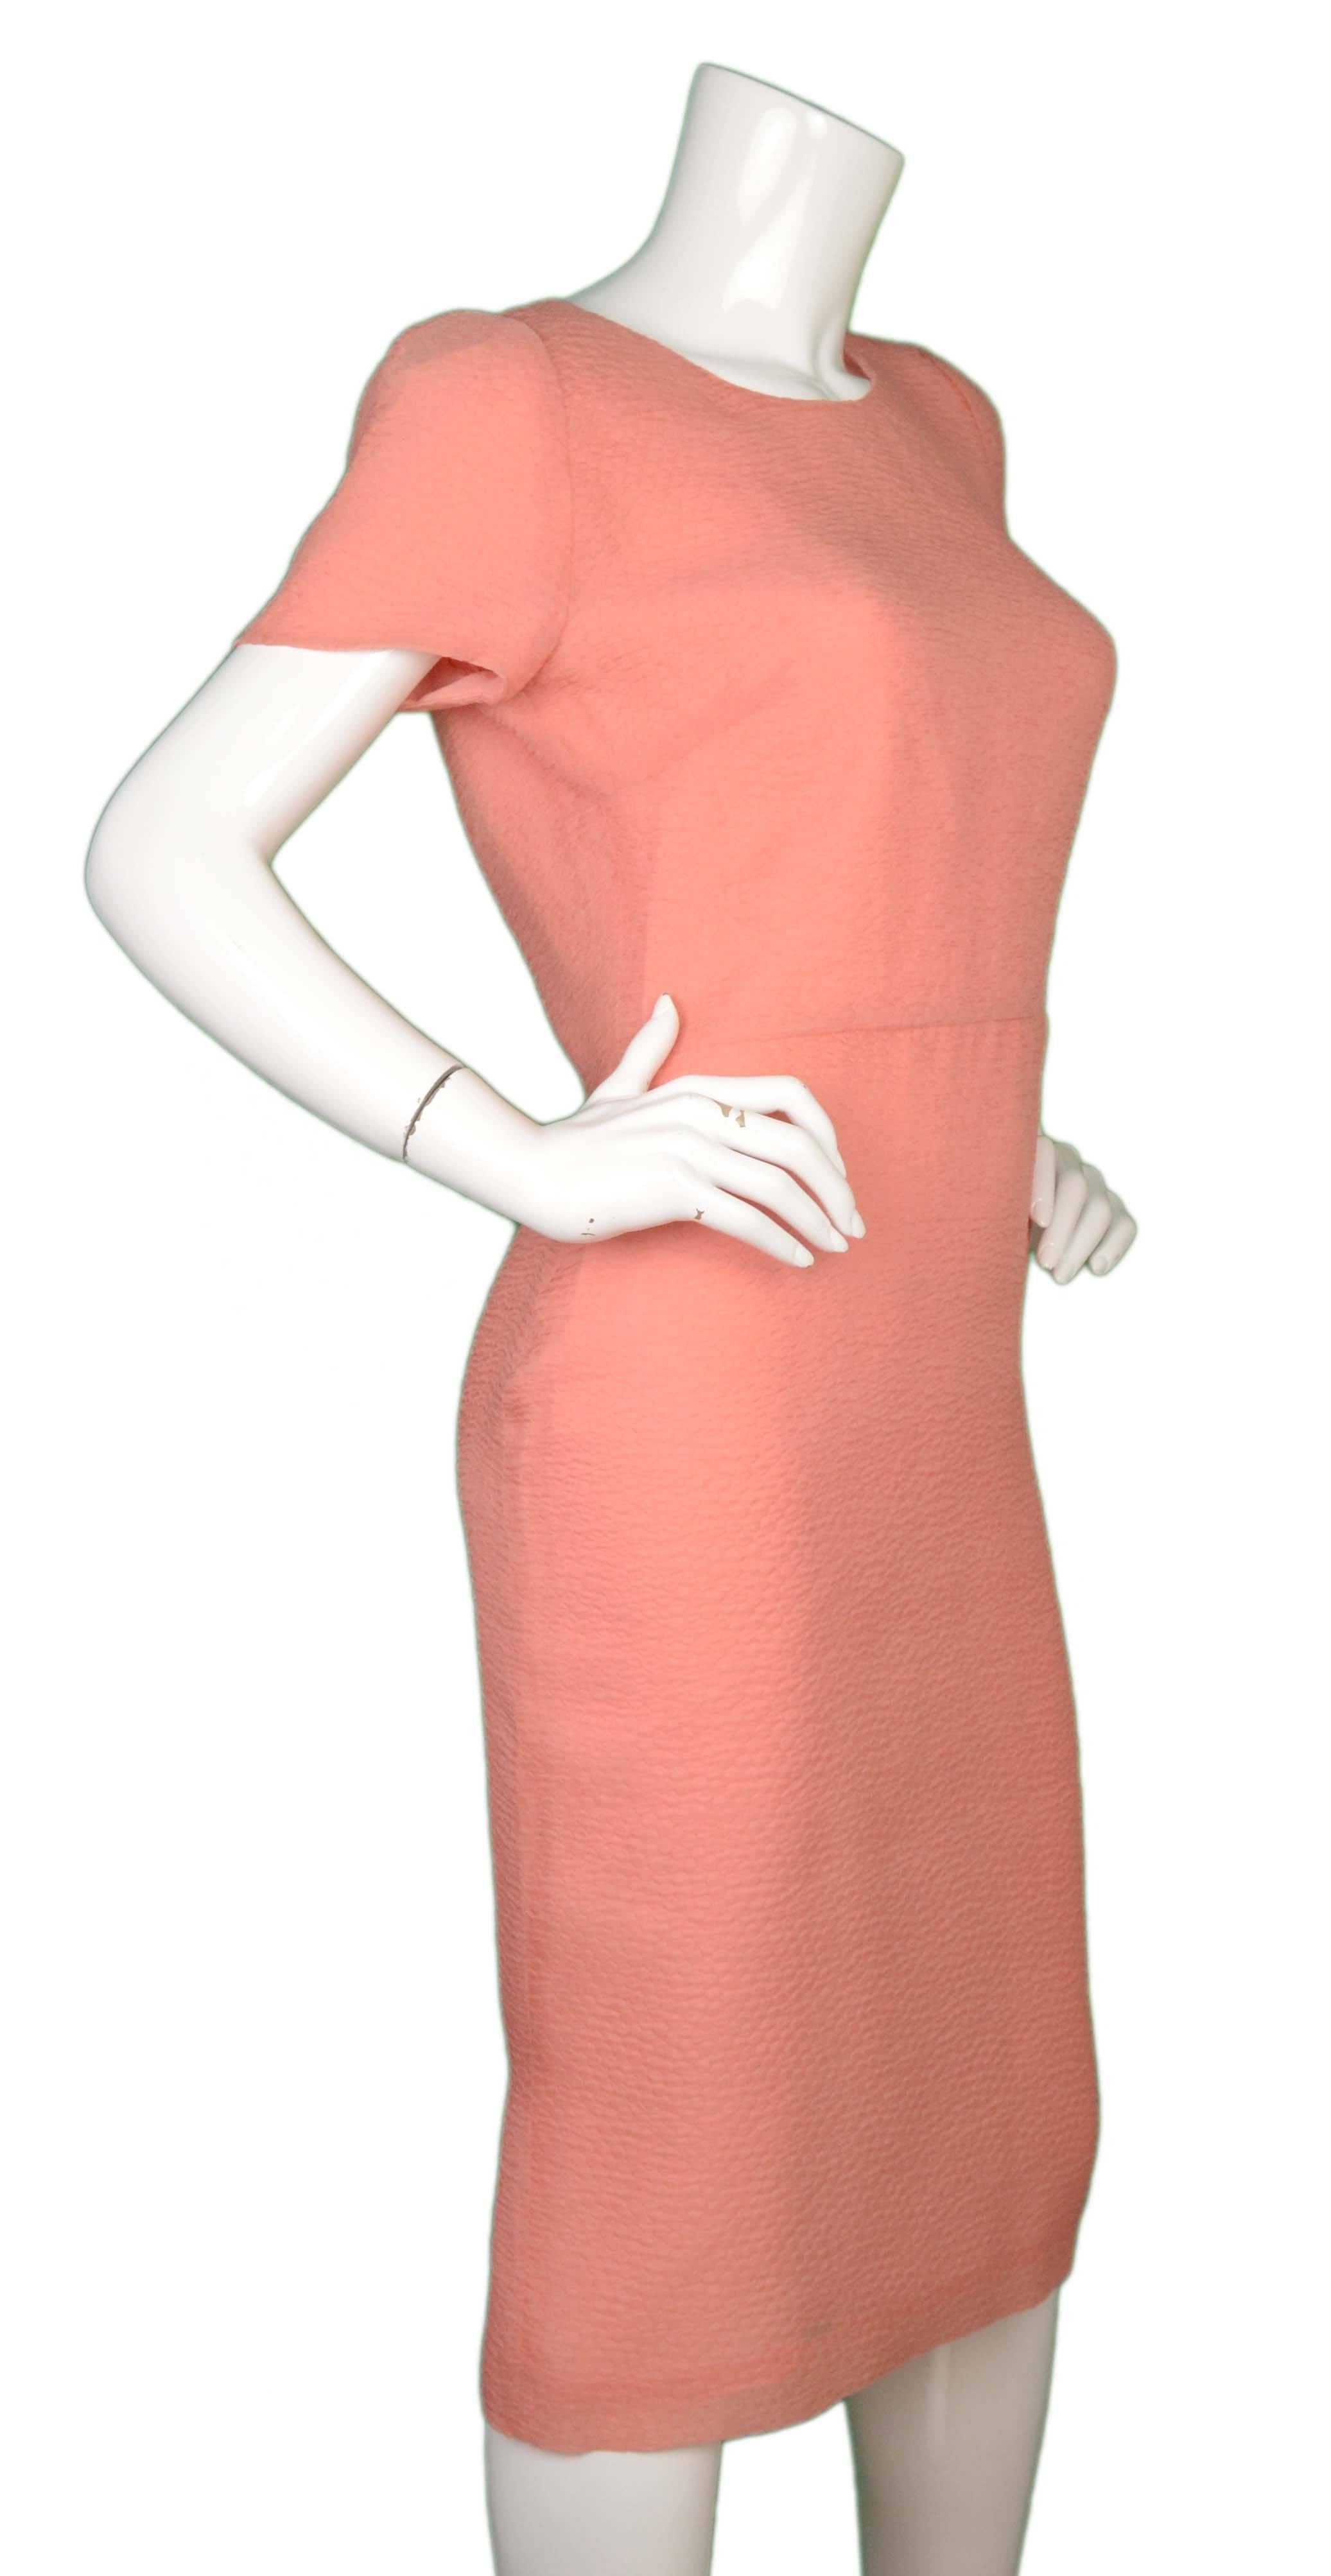 Burberry Prorsum Peach Textured Silk Short Sleeve Dress
Made In: Italy
Color: Peach
Composition: 67% silk, 33% polyamide, 
Lining: Peach, 100% silk
Closure/Opening: Back center zip up
Exterior Pockets: None
Interior Pockets: None
Retail